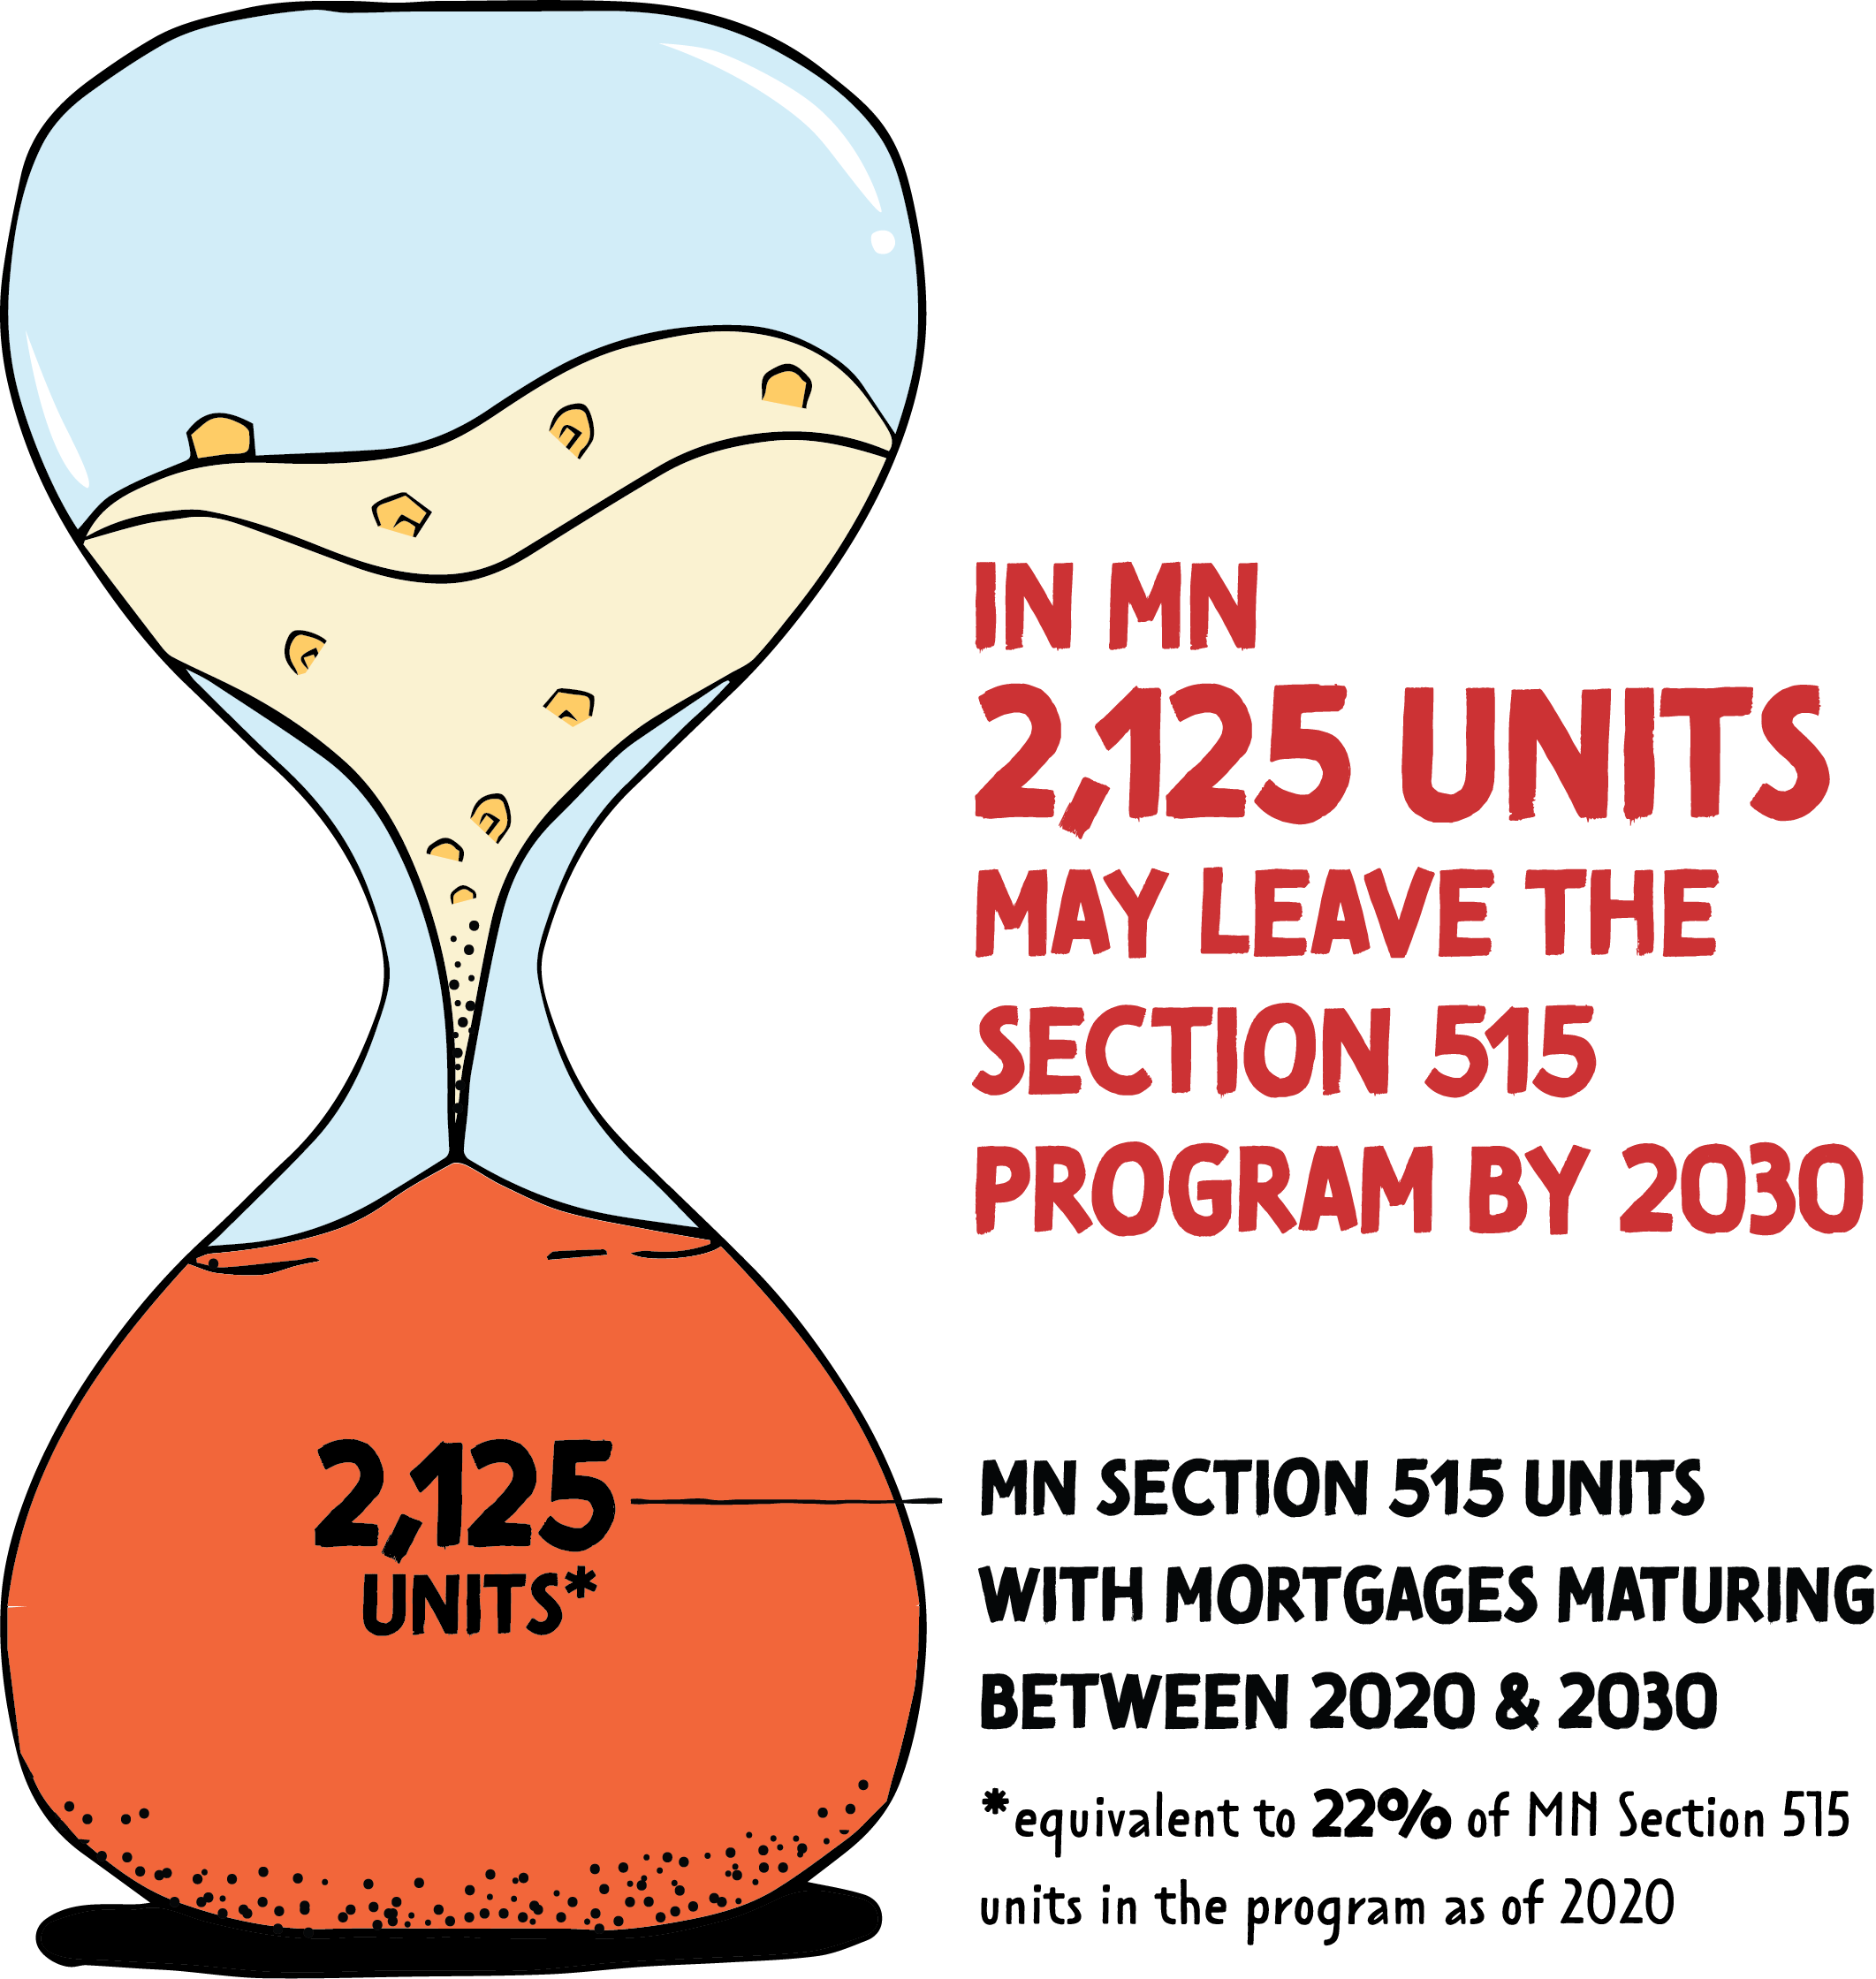 In MN 2,125 units may leave the section 515 program by 2030